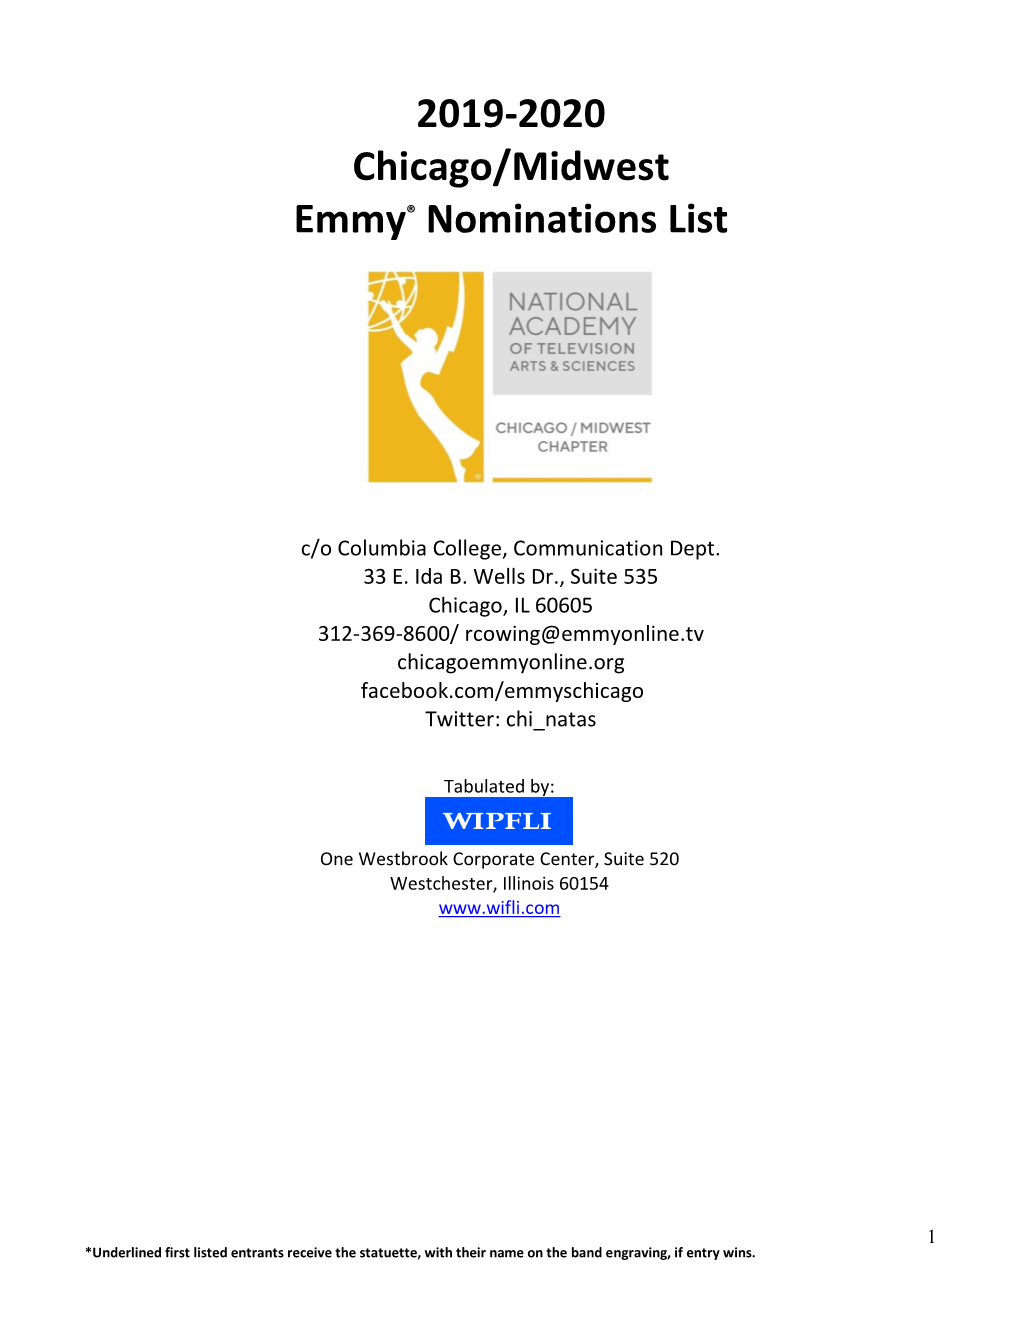 2019-2020 Chicago/Midwest Emmy® Nominations List